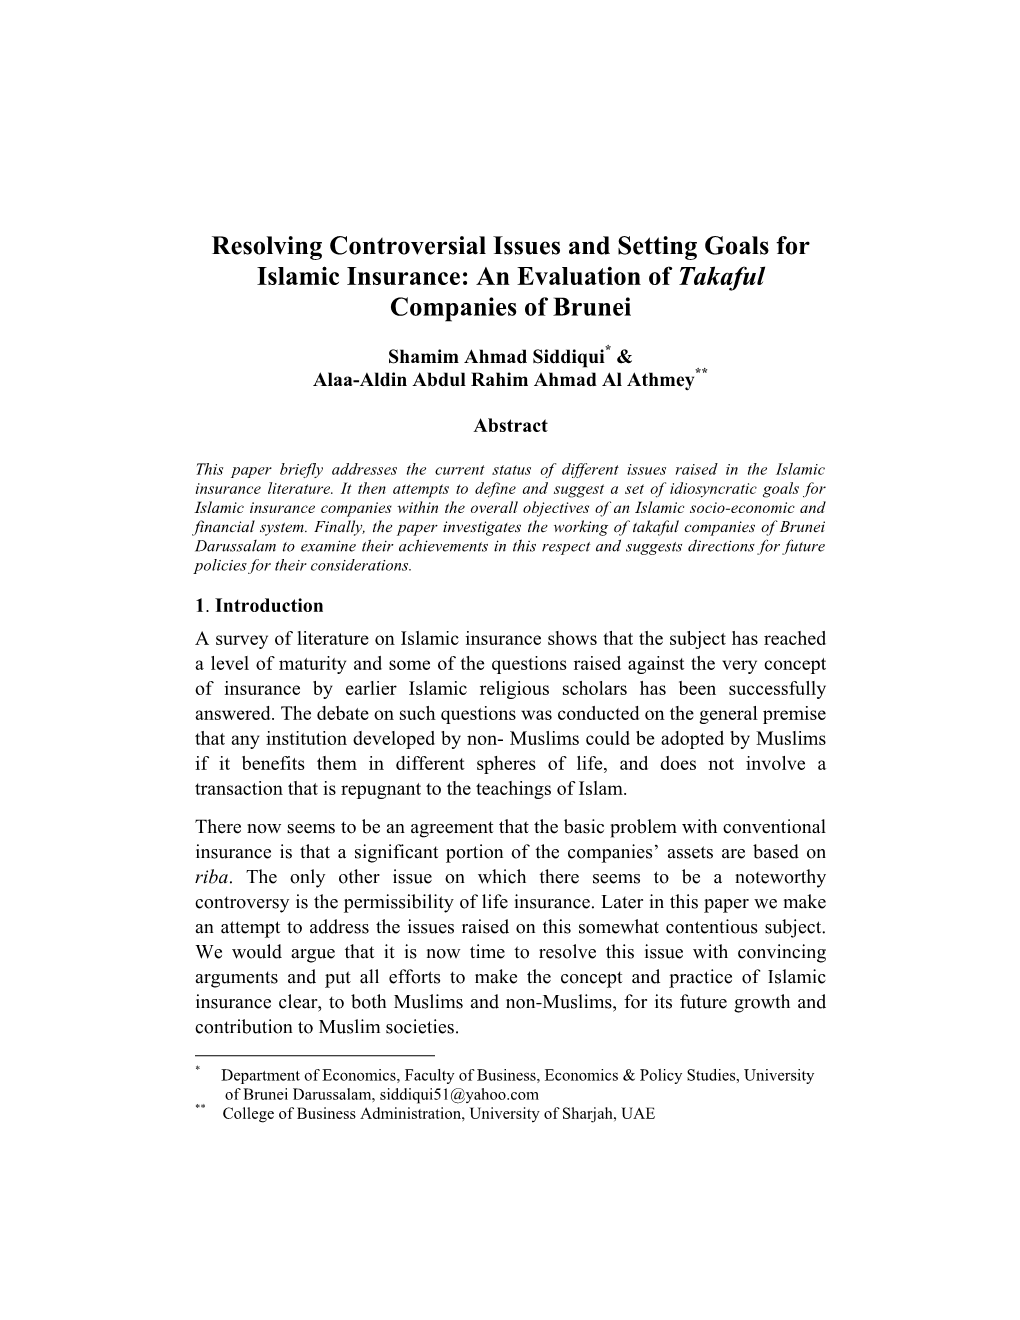 Resolving Controversial Issues and Setting Goals for Islamic Insurance: an Evaluation of Takaful Companies of Brunei